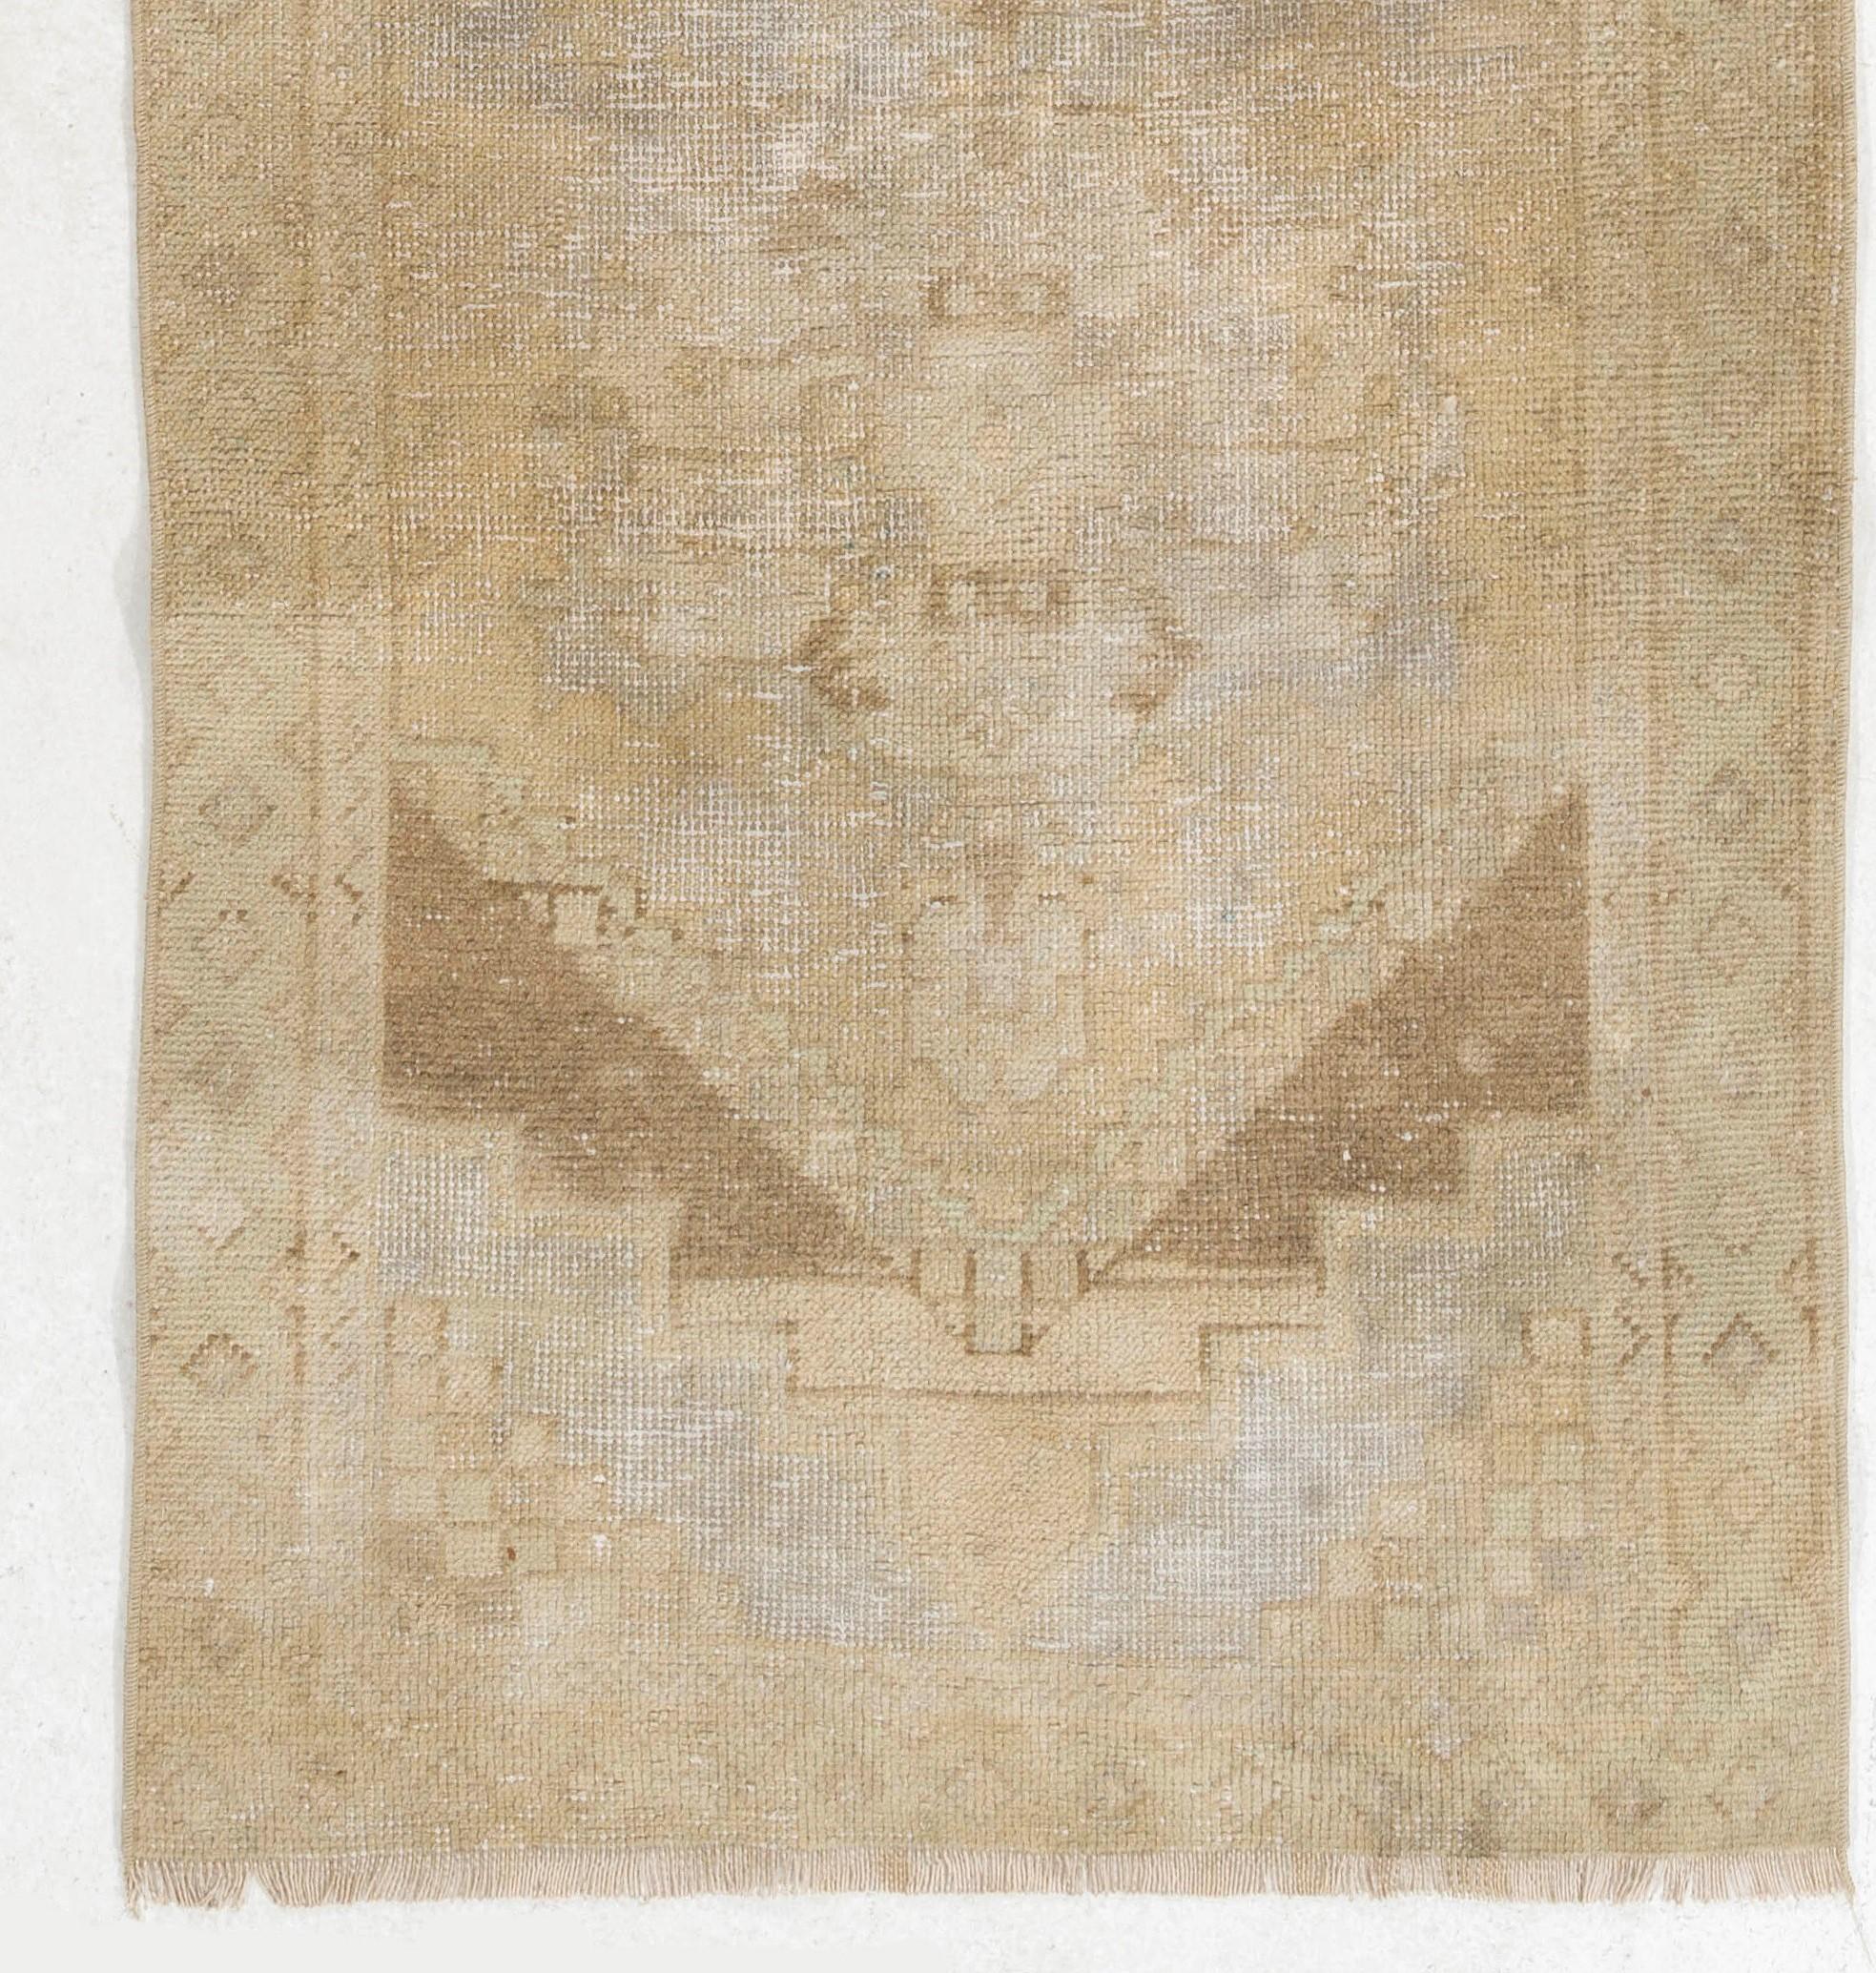 Mid-20th Century 3x8.8 Ft - Antique Turkish Oushak Runner in Neutral Colors. Handknotted Wool Rug